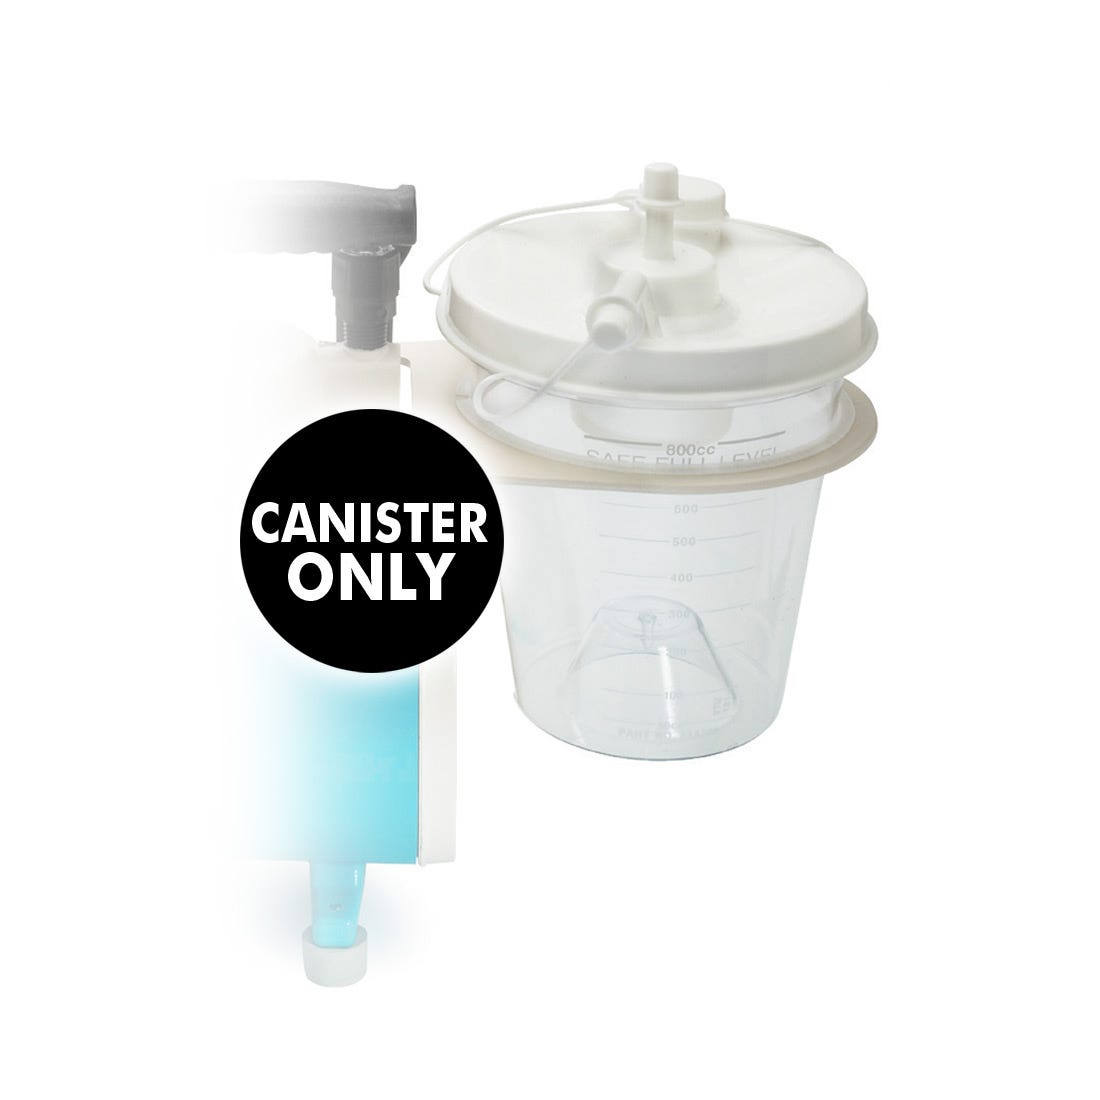 Schuco-Vac 430 Aspirator - Disposable Replacement Canister